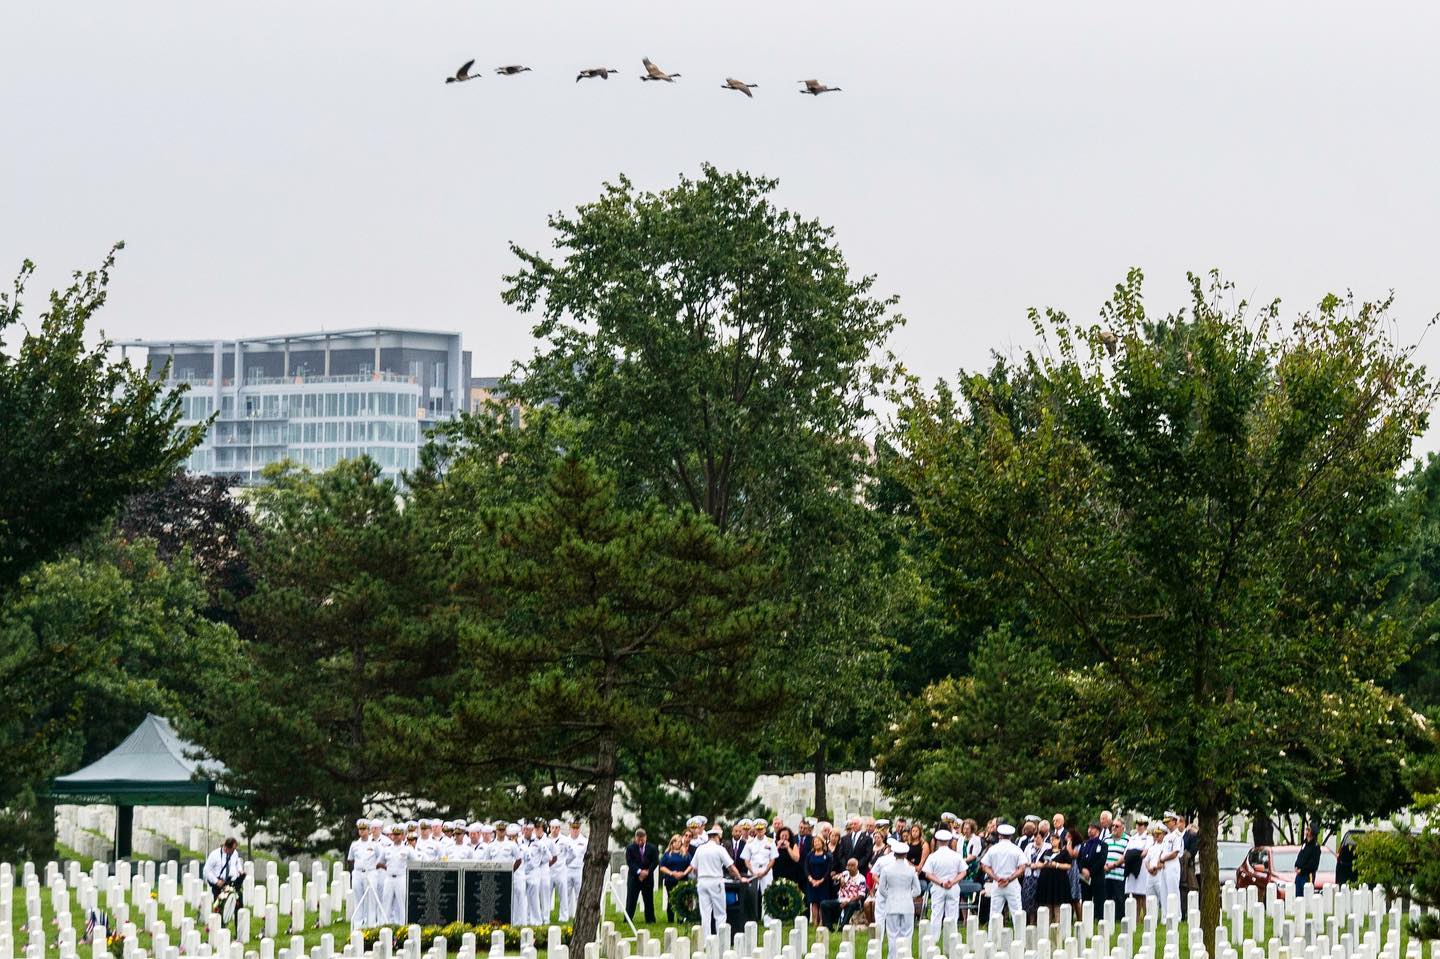 Geese fly over a service in Section 64 of Arlington National Cemetery. To the left of the image can be seen the Pentagon Group Burial Marker, which honors and commemorates those lives lost during the 9/11 attack on the Pentagon. 

The monument is inscribed with 184 names, honoring all those that perished in the Pentagon and on American Airlines Flight 77.

The monument is located off Patton Circle in Section 64, in the southeastern part of the cemetery, closest to the Pentagon.

We will never forget.